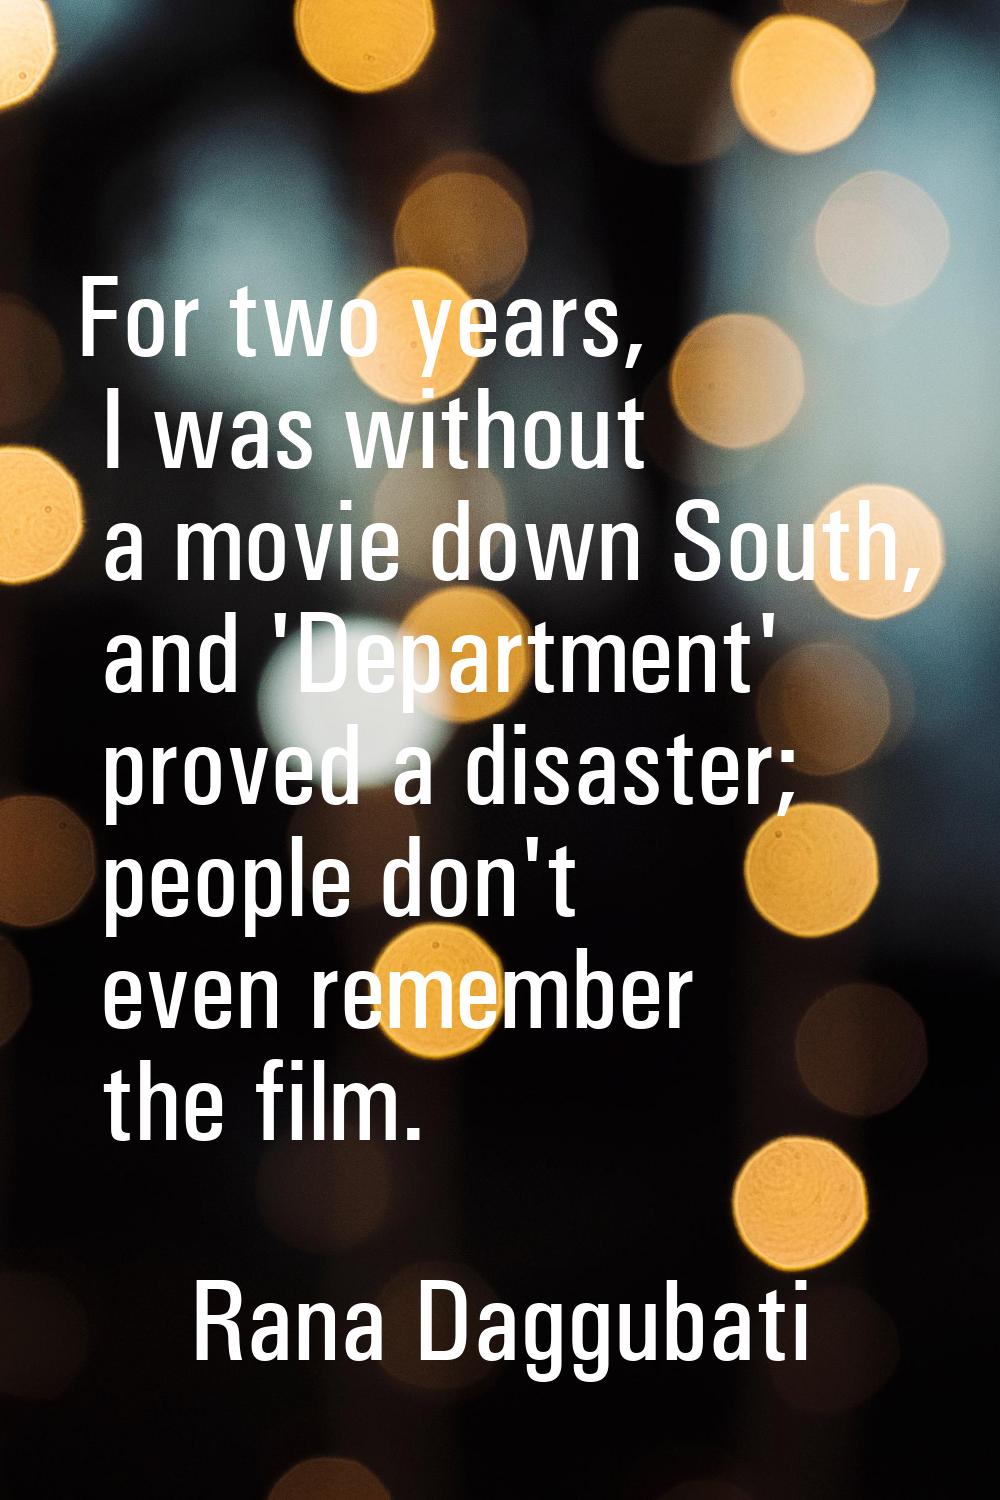 For two years, I was without a movie down South, and 'Department' proved a disaster; people don't e